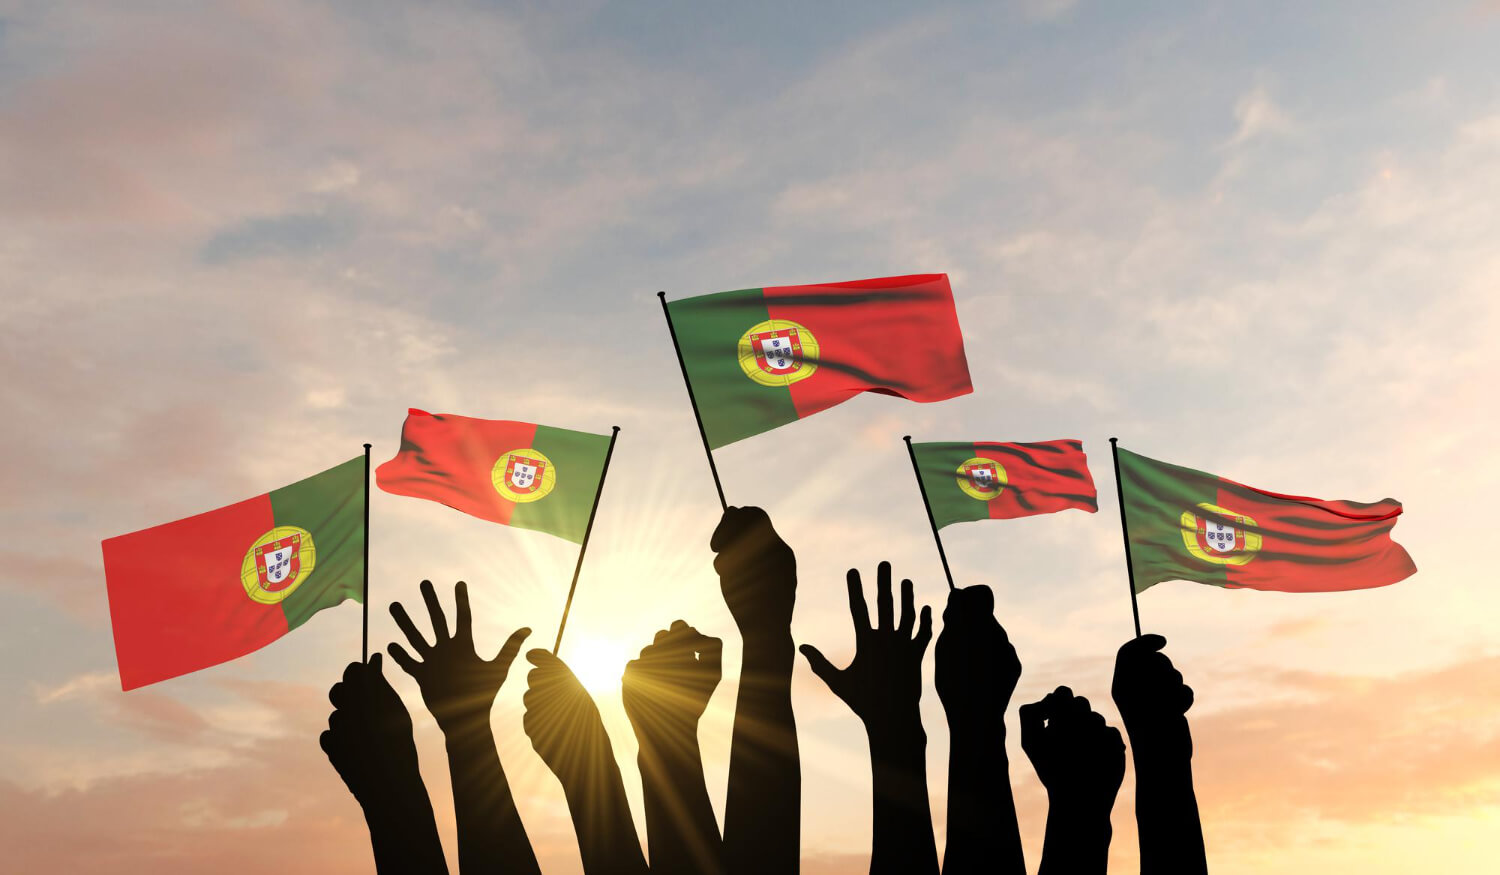 Portugal one step closer to adult-use legalization